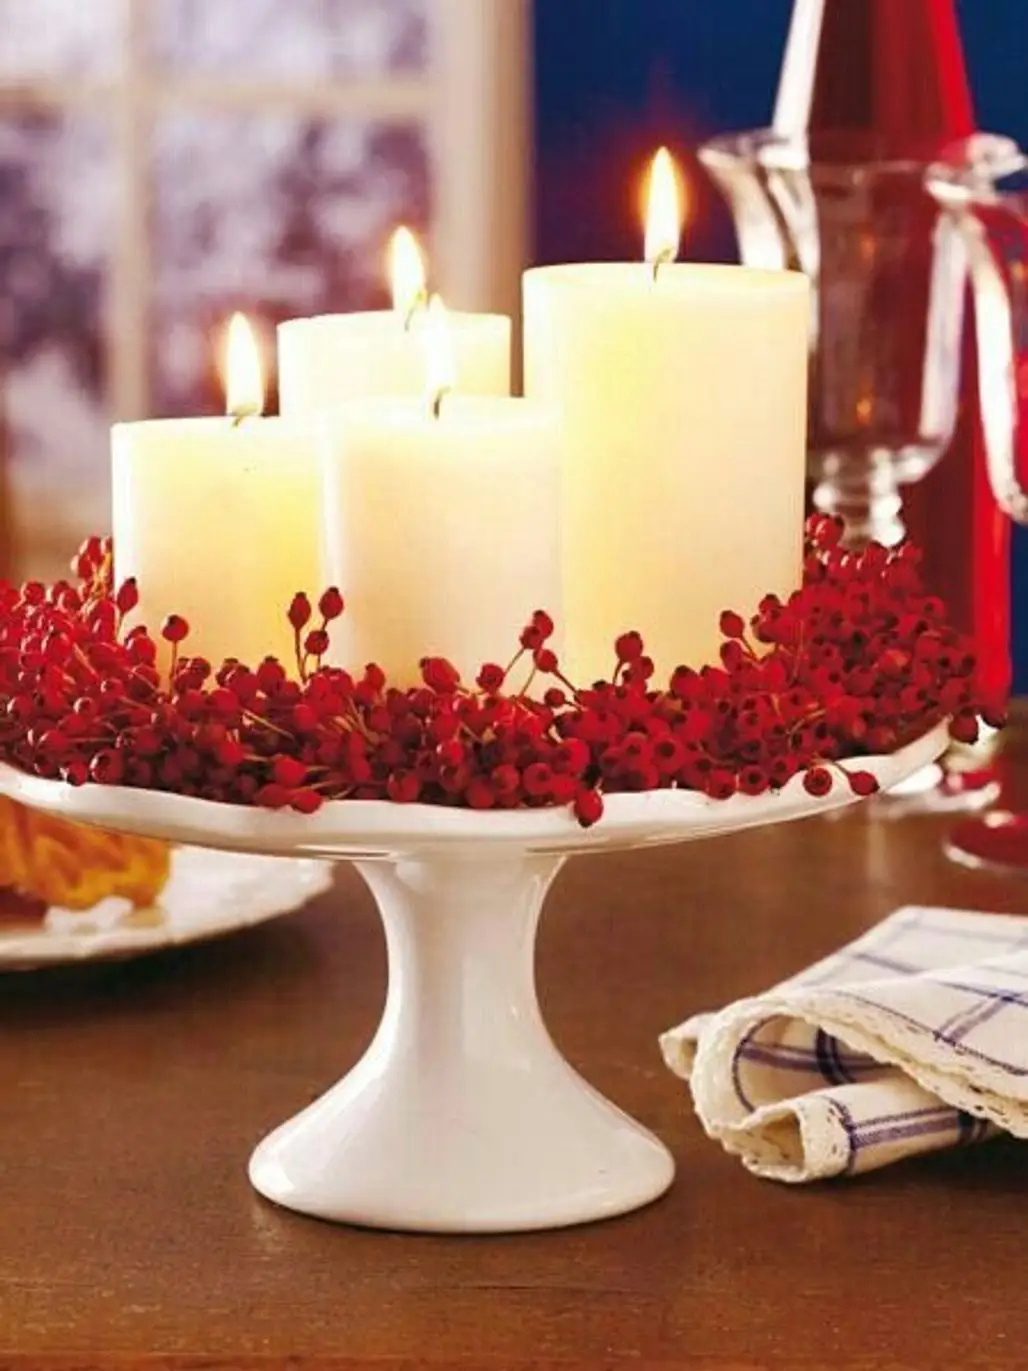 Candles Elevated on a Cake Stand